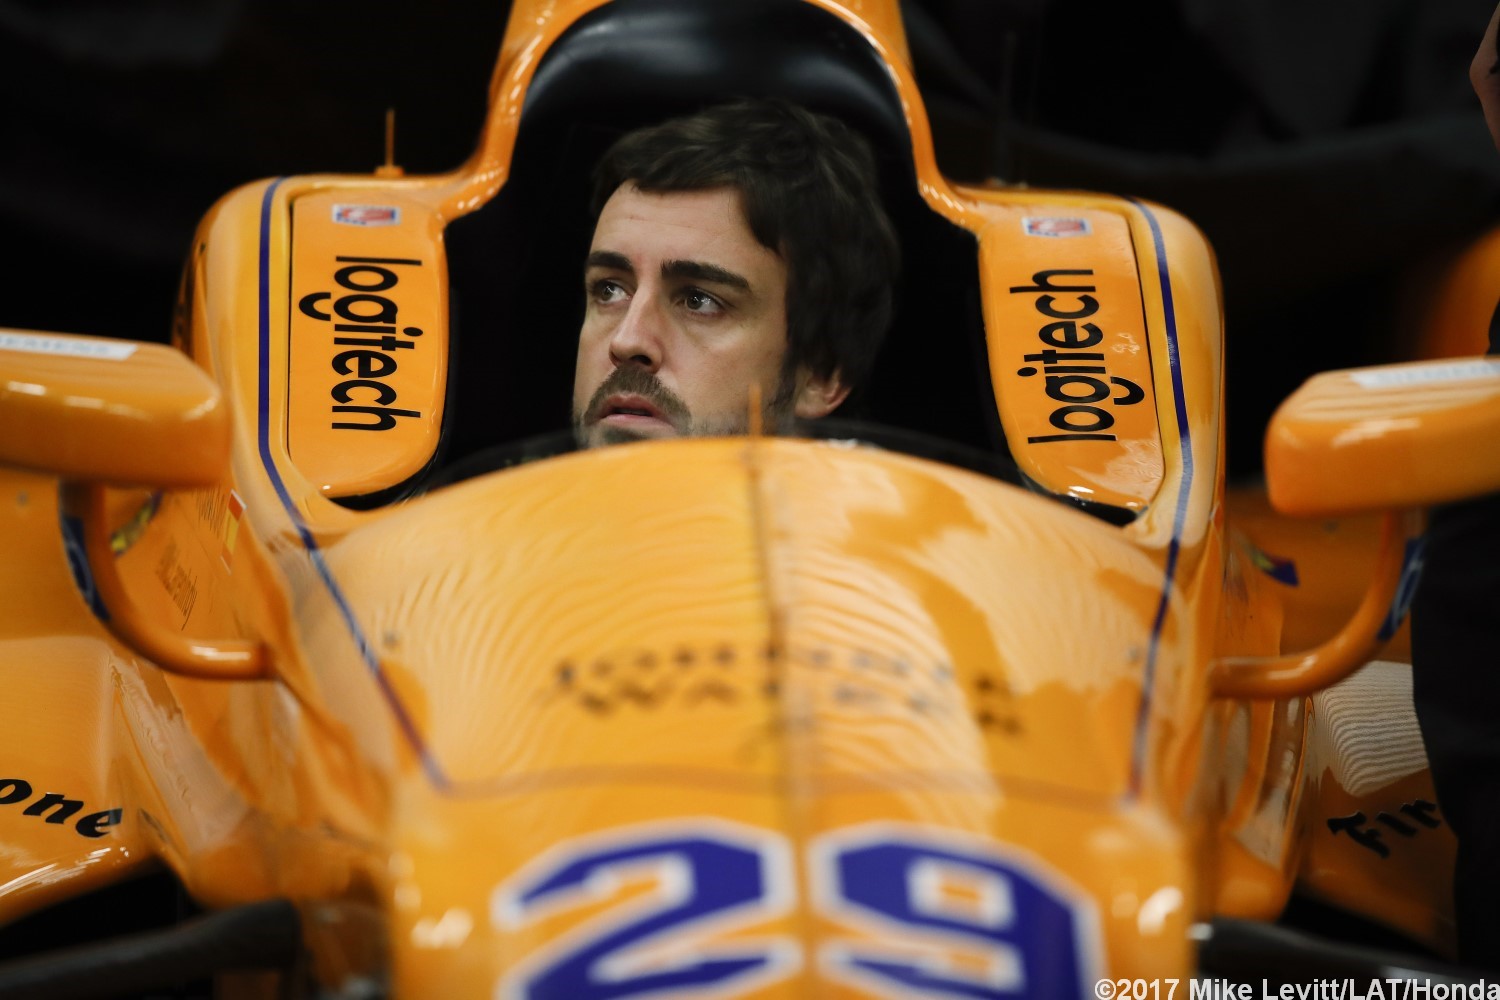 With the engineer Alonso has for Indy this year there is a very good chance Alonso will win the 2019 Indy 500